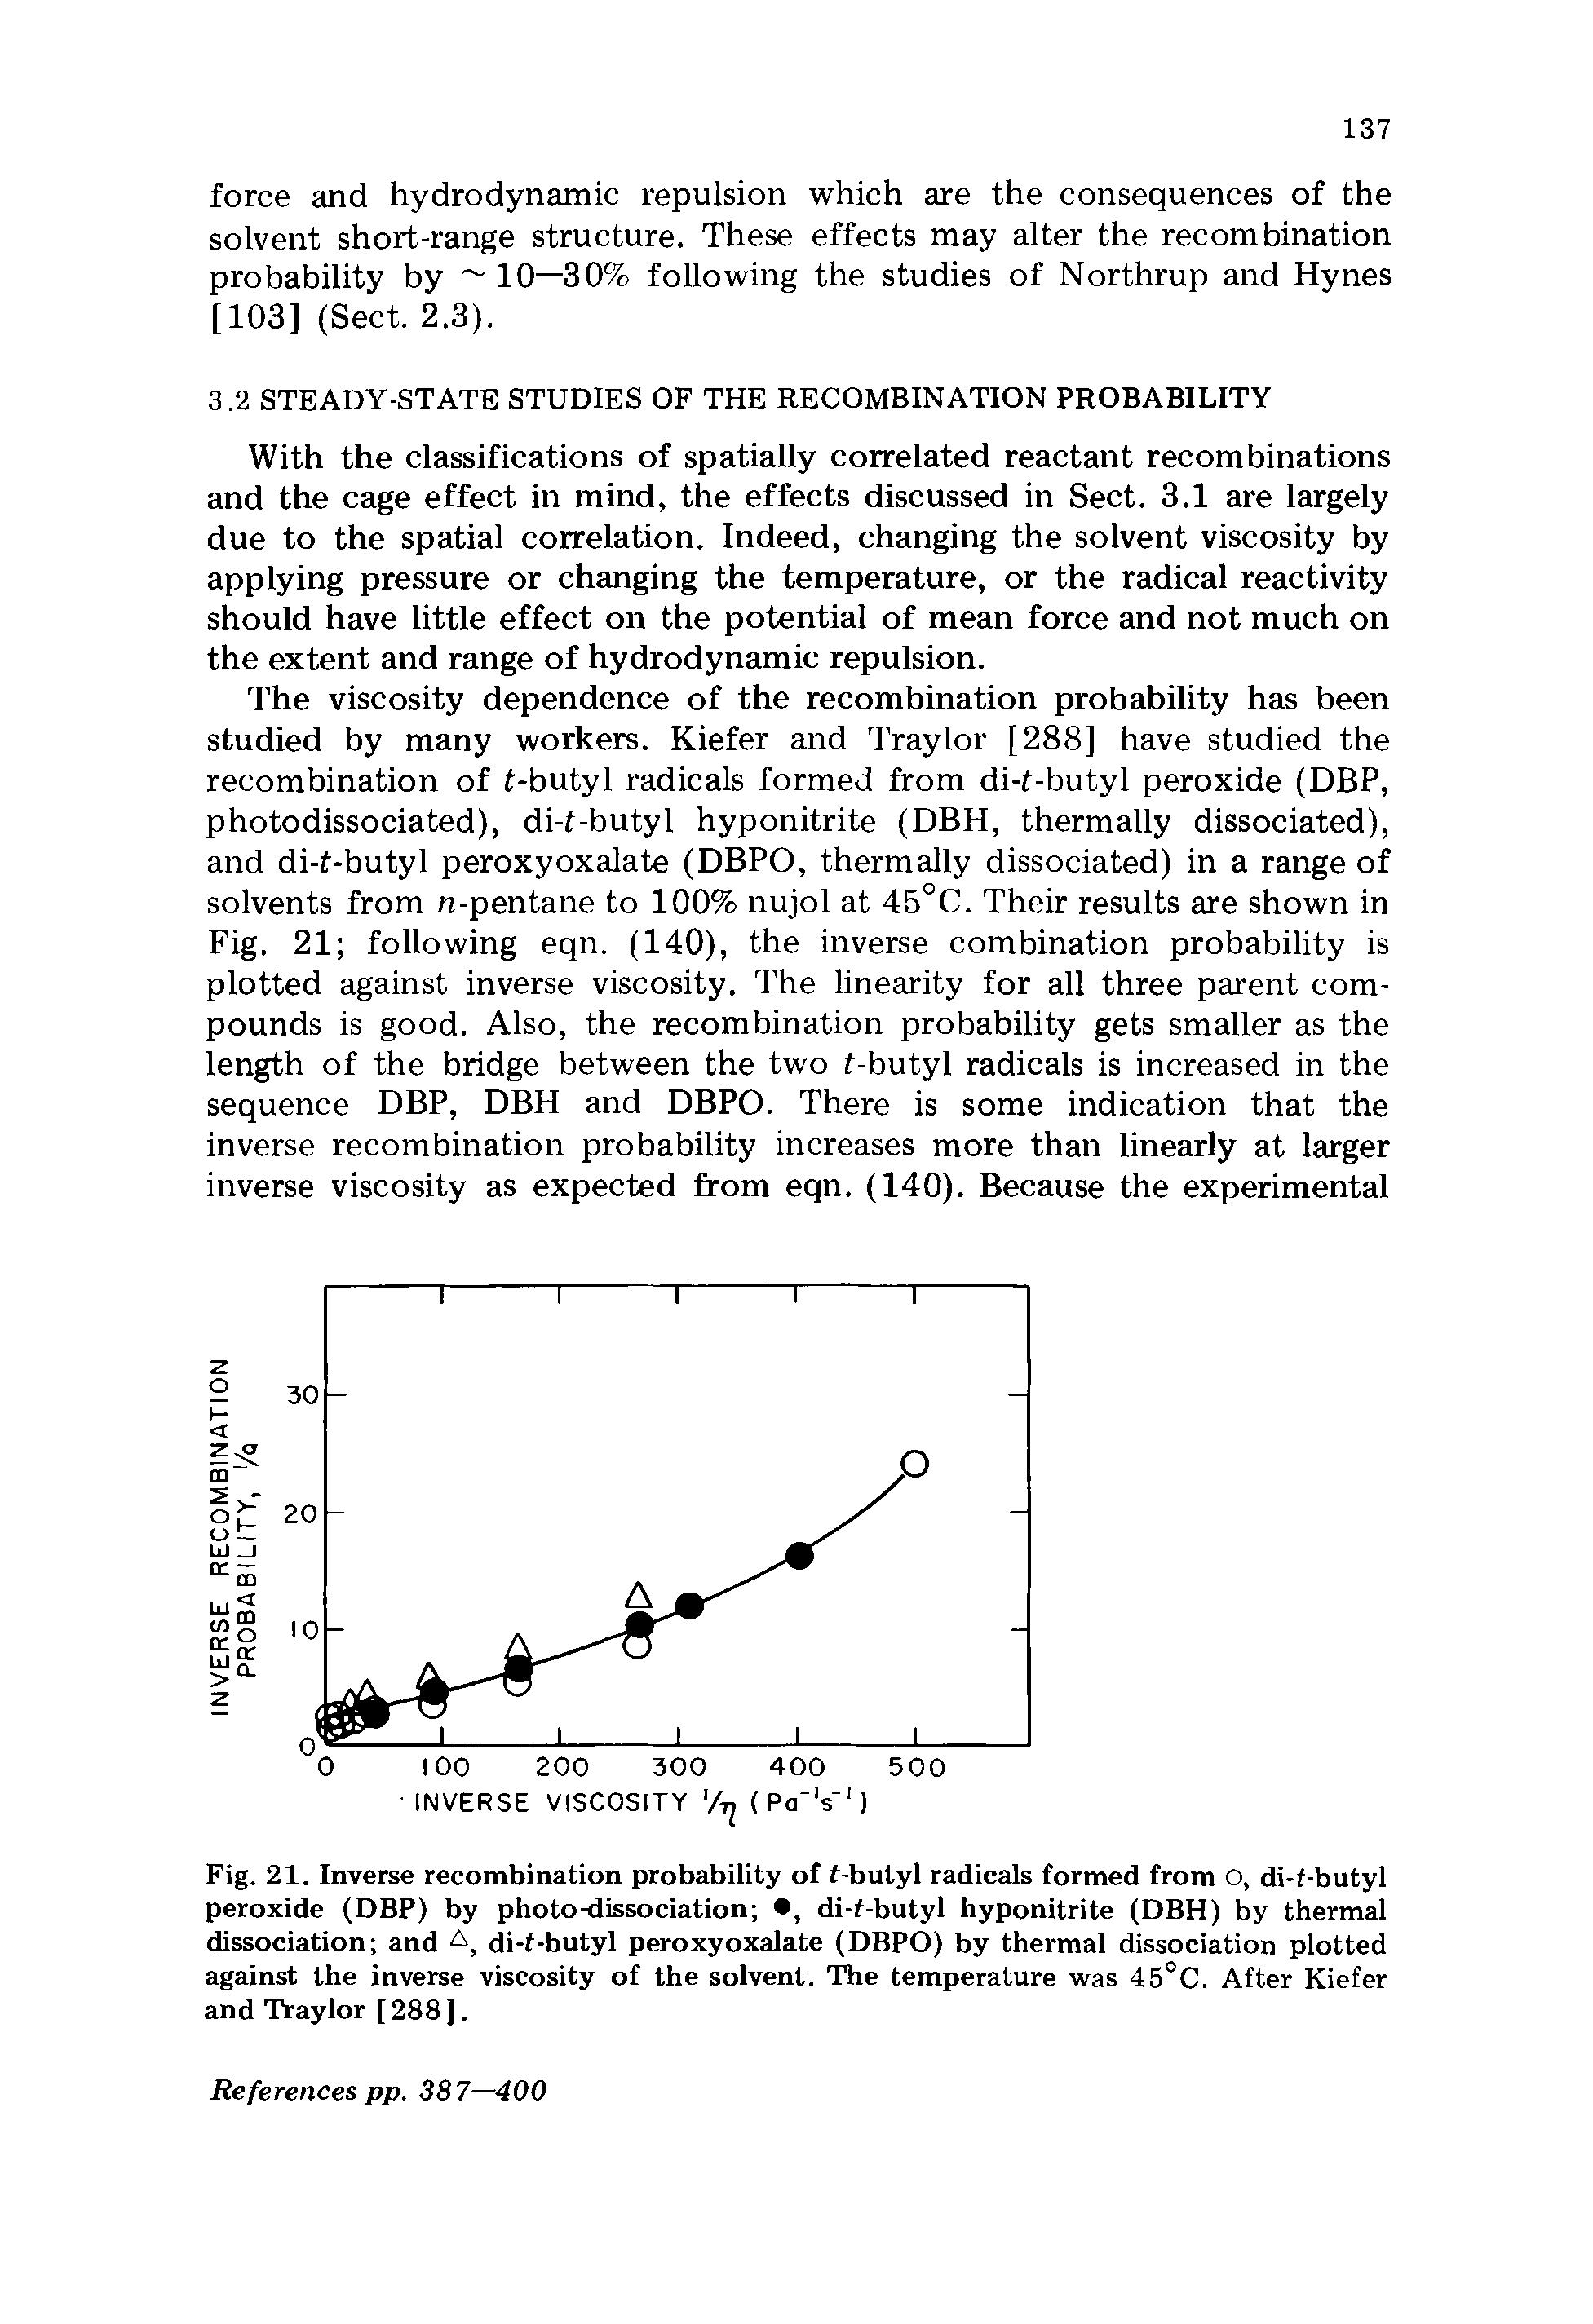 Fig. 21. Inverse recombination probability of f-butyl radicals formed from O, di-f-butyl peroxide (DBP) by photo-dissociation , di-f-butyl hyponitrite (DBH) by thermal dissociation and A, di-f-butyl peroxyoxalate (DBPO) by thermal dissociation plotted against the inverse viscosity of the solvent. The temperature was 45°C. After Kiefer and Traylor [288 ].